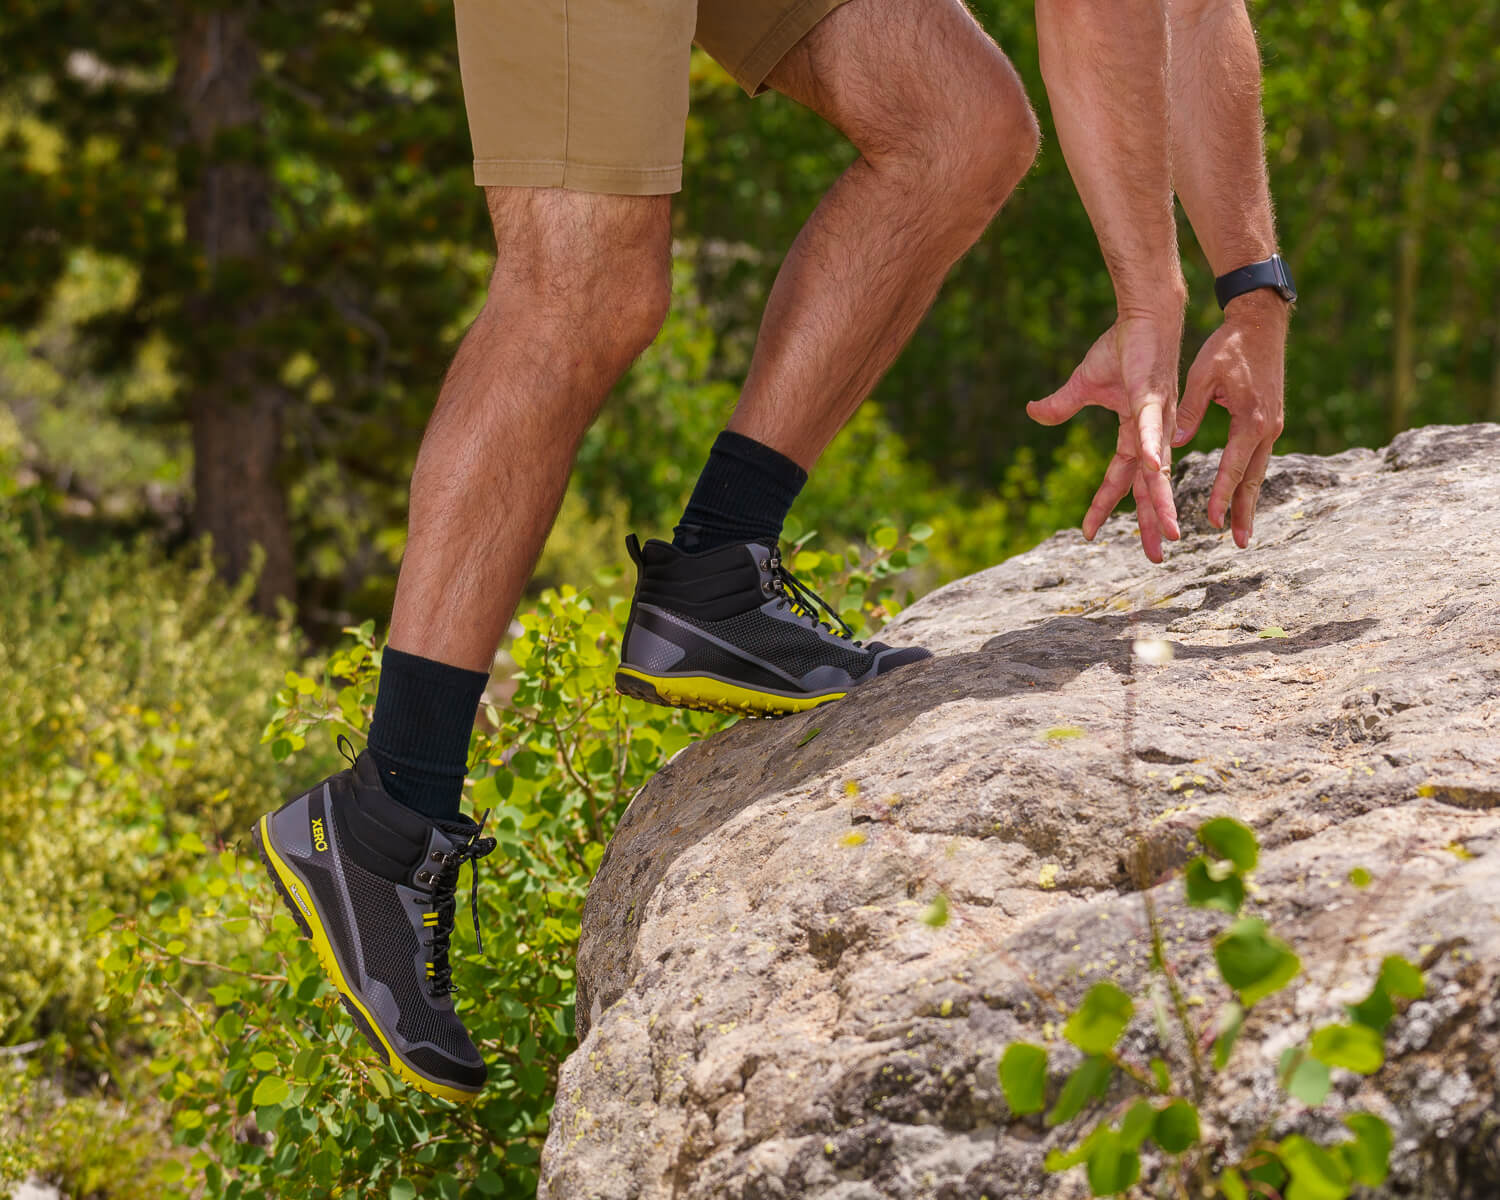 Xero Shoes Lightweight Hiking Boots are Under 14oz - Xero Shoes